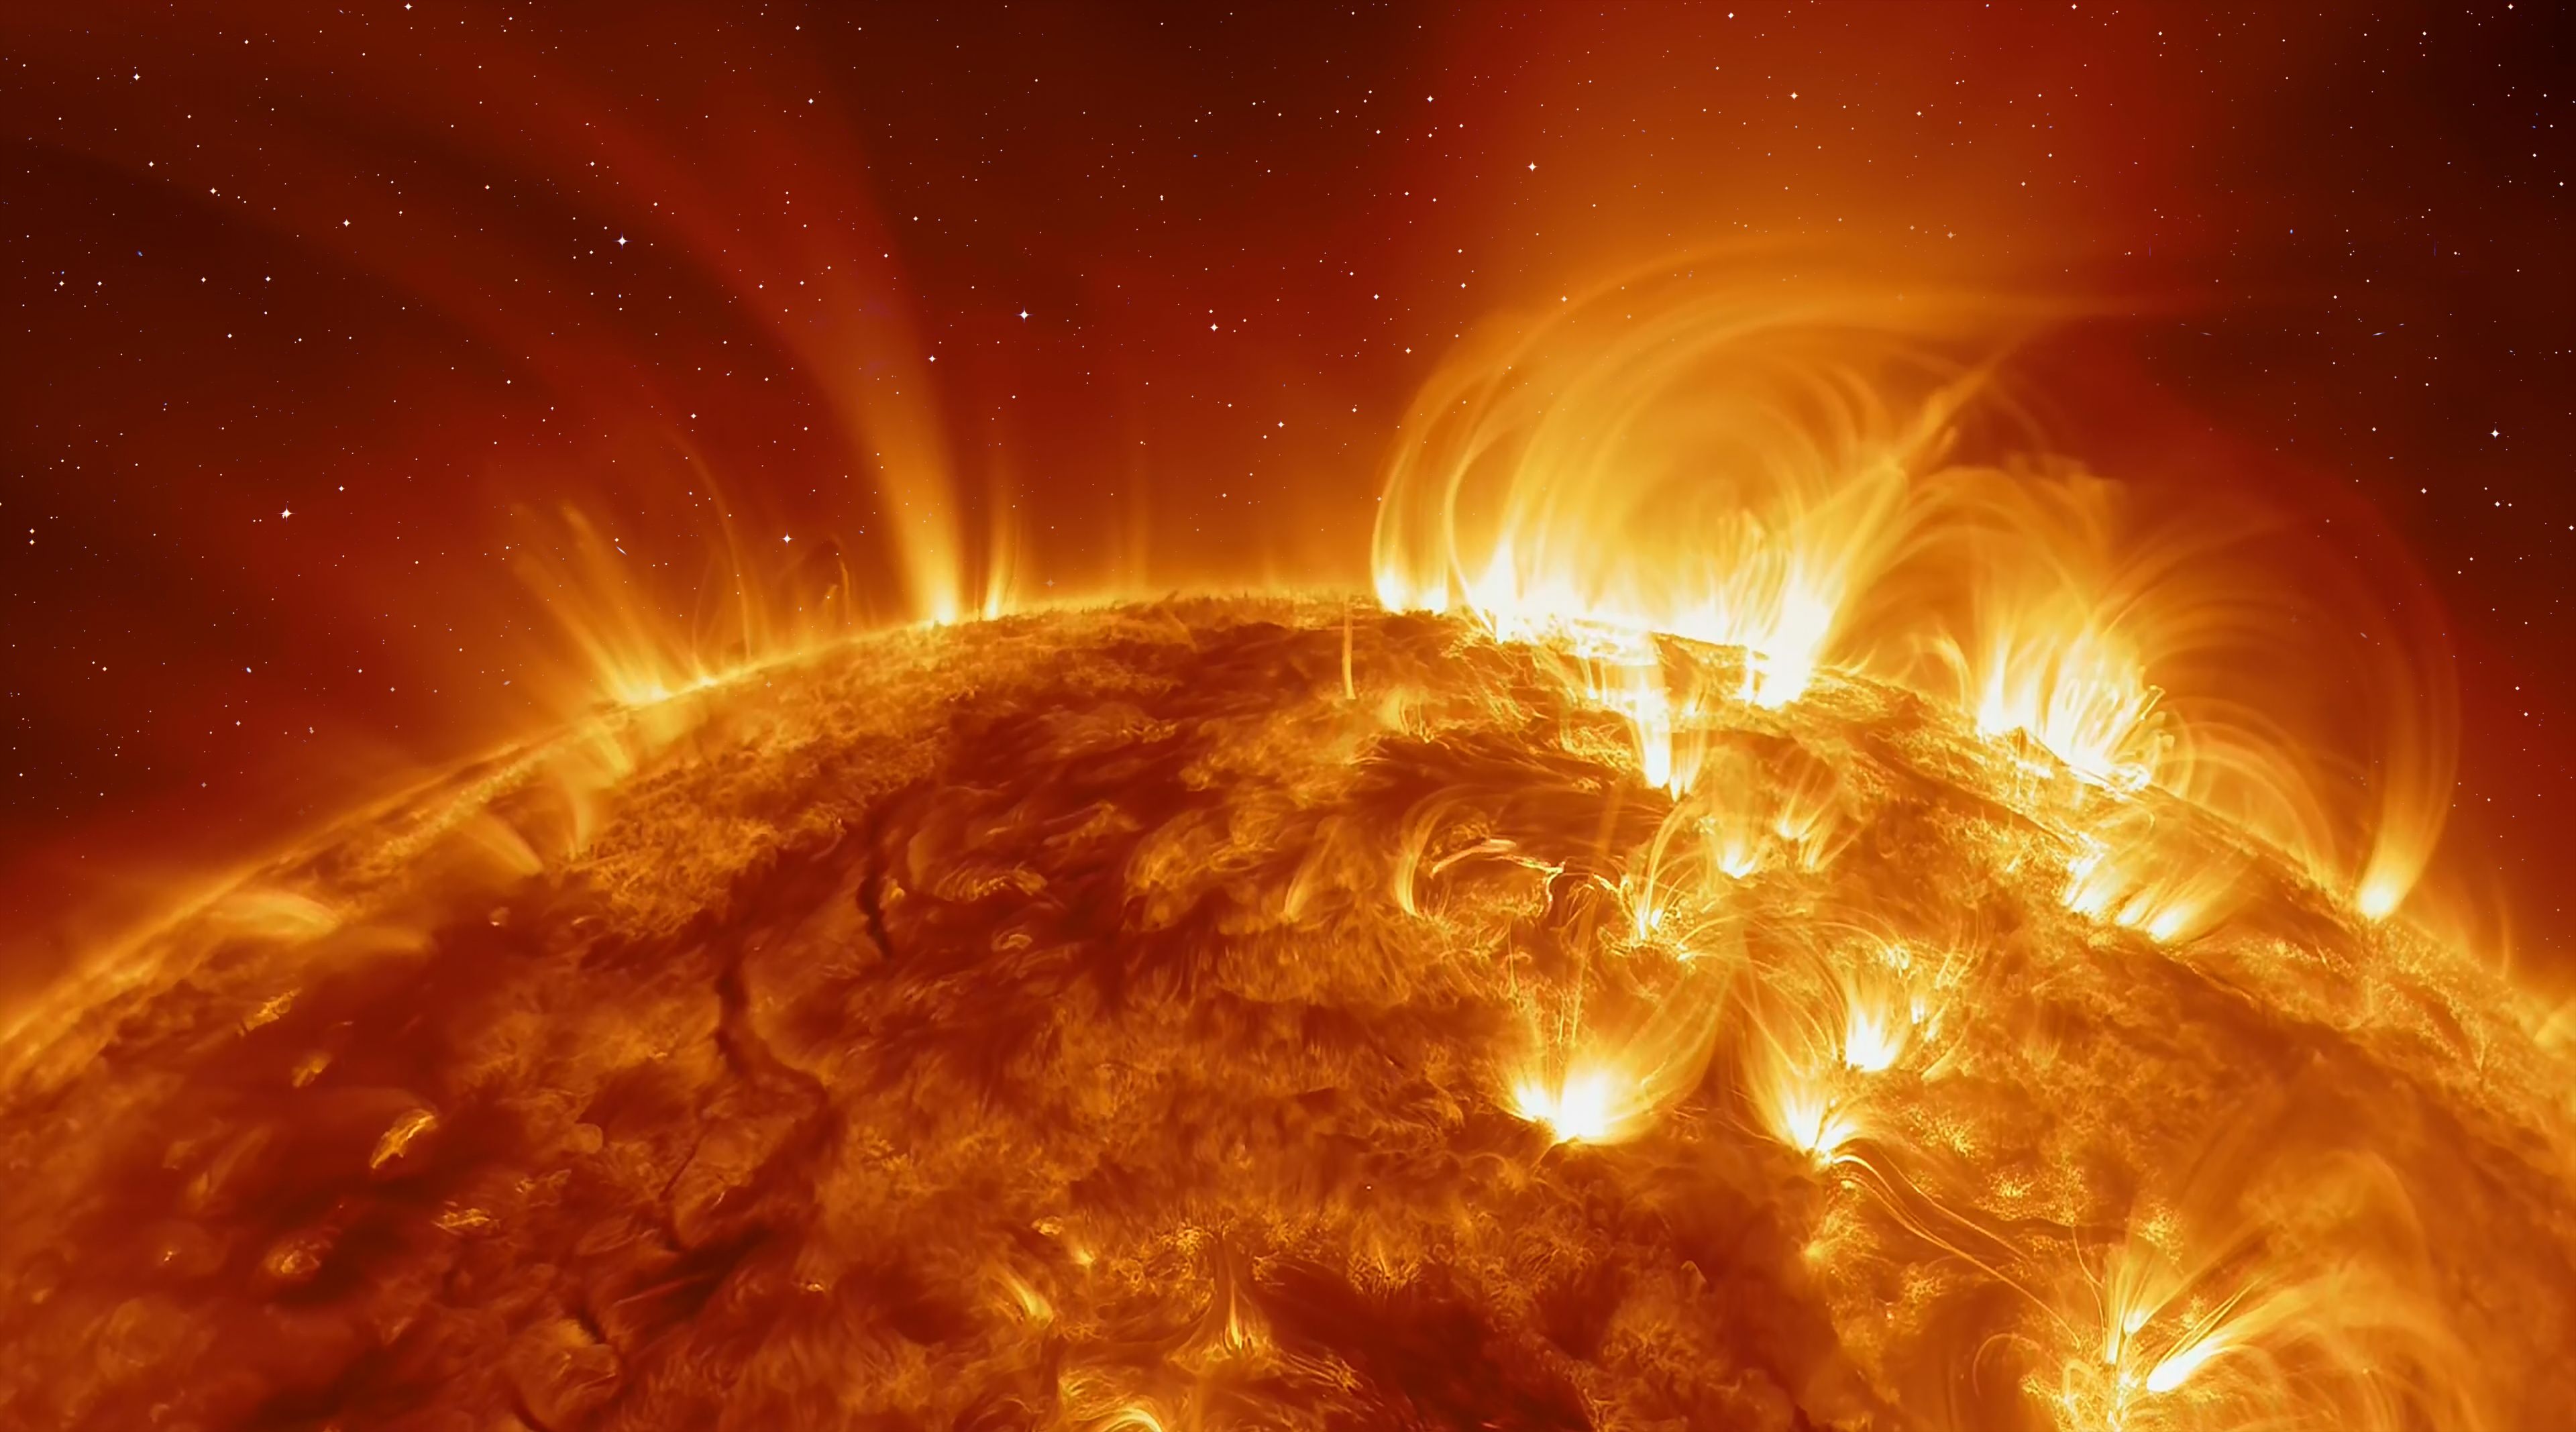 An image of the solar flares from the sun 